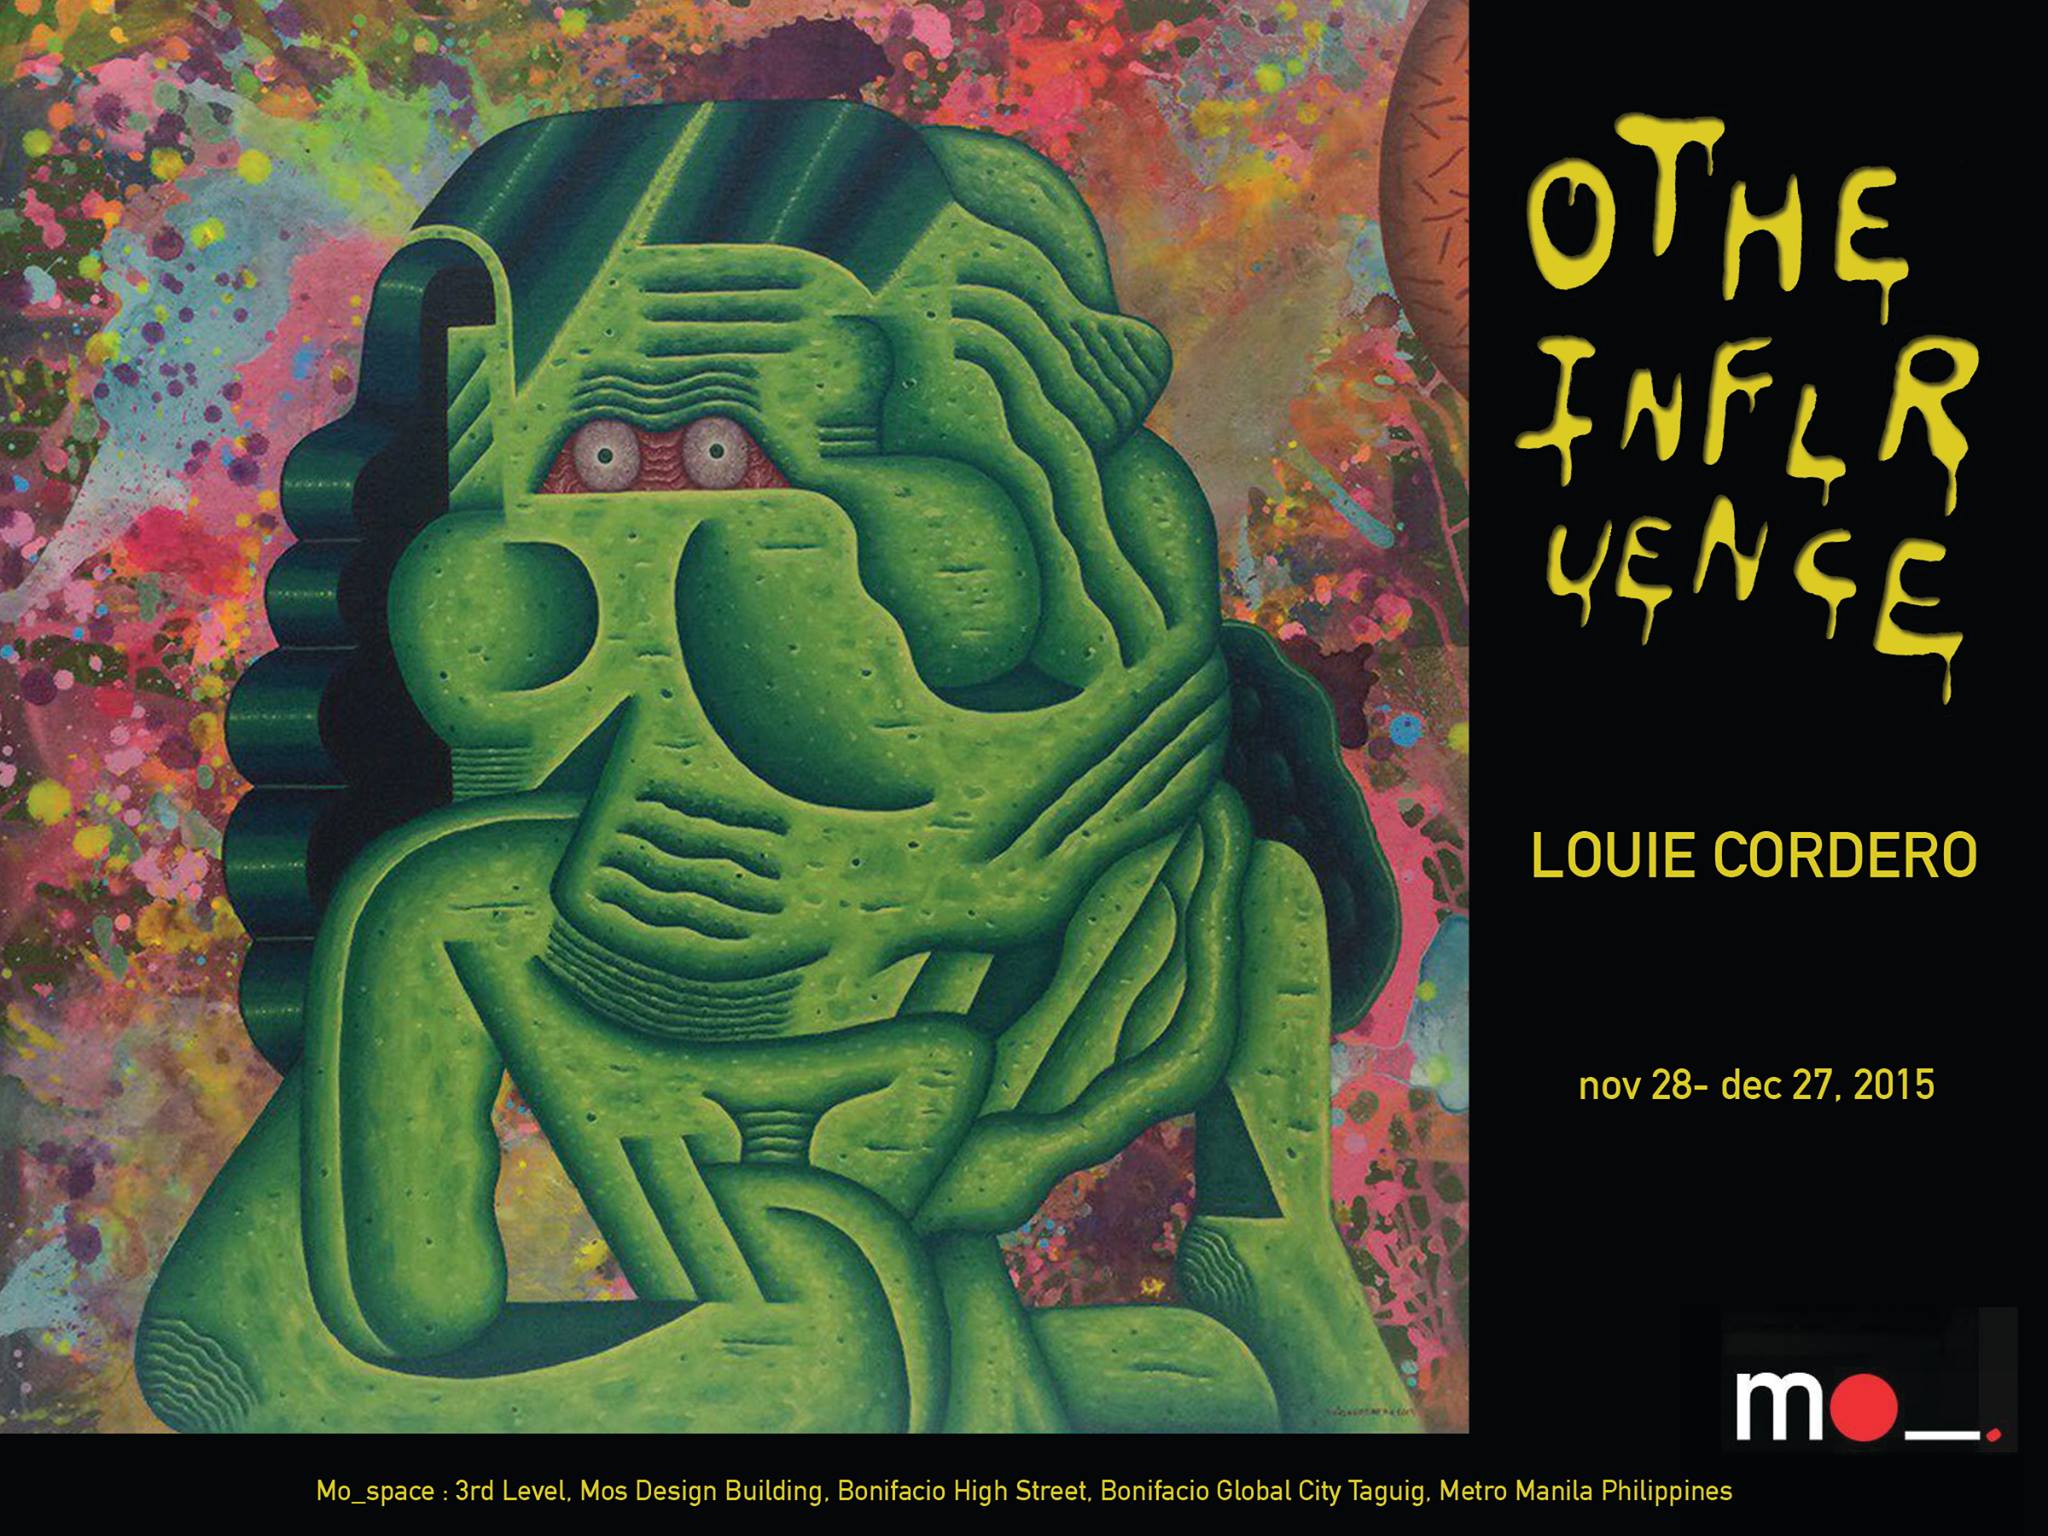 Louie Cordero: Other Influence clock Saturday, November 28 at 6:00pm 3 days from now · 89°F / 76°F Partly Cloudy pin Show Map MO_Space 9th Avenue, Bonifacio High Street, 1634 Taguig, Philippines There is a curious entity that surrounds a Louie Cordero painting, which does not merely ascribe to the peculiar frame he has devised and has ingeniously designed for each piece. These frames, though—coated in a bustle of neon splashes or eccentric art deco patterns—encapsulate an idea: that the range for finding creative expression and delivering new sensory experience should exceed a canvas’s surface. In turning the frames for his paintings into objects for artistic expression, the usually restrained images engulfed by dull, disconnected strips of woodwork, suddenly breaks free from a kind of silence. This is the whole idea, then; that imagination and consciousness are always extended, whether inside or outside the frame. The imagination that Cordero casts—in paintings, objects, sculptures, or other wall-bound works—continue to extend itself, to wander and loiter around the unclaimed recesses that lie between the familiar and the strange, the somber and the comical, the aesthetic and the grotesque. It carries out its excursions every time a curfew is set in place, wandering while logic and belief is suspended. The result is a deranged hierarchy of forms, a meltdown, accentuated by the oozing appendages and innards from each of his painted characters. His new set of paintings, which focuses on a central figure instead of disjointed narratives, speak of its own innovation within and outside the painted surface. Animate figures, spurred into action and situations that implore their existence, become the subject matter for his usual juxtaposition of incoherent elements within the frame. We see familiar figures set against fantastical components; we perceive the images from real-life—peering eyes, a set of hands, a pair of s